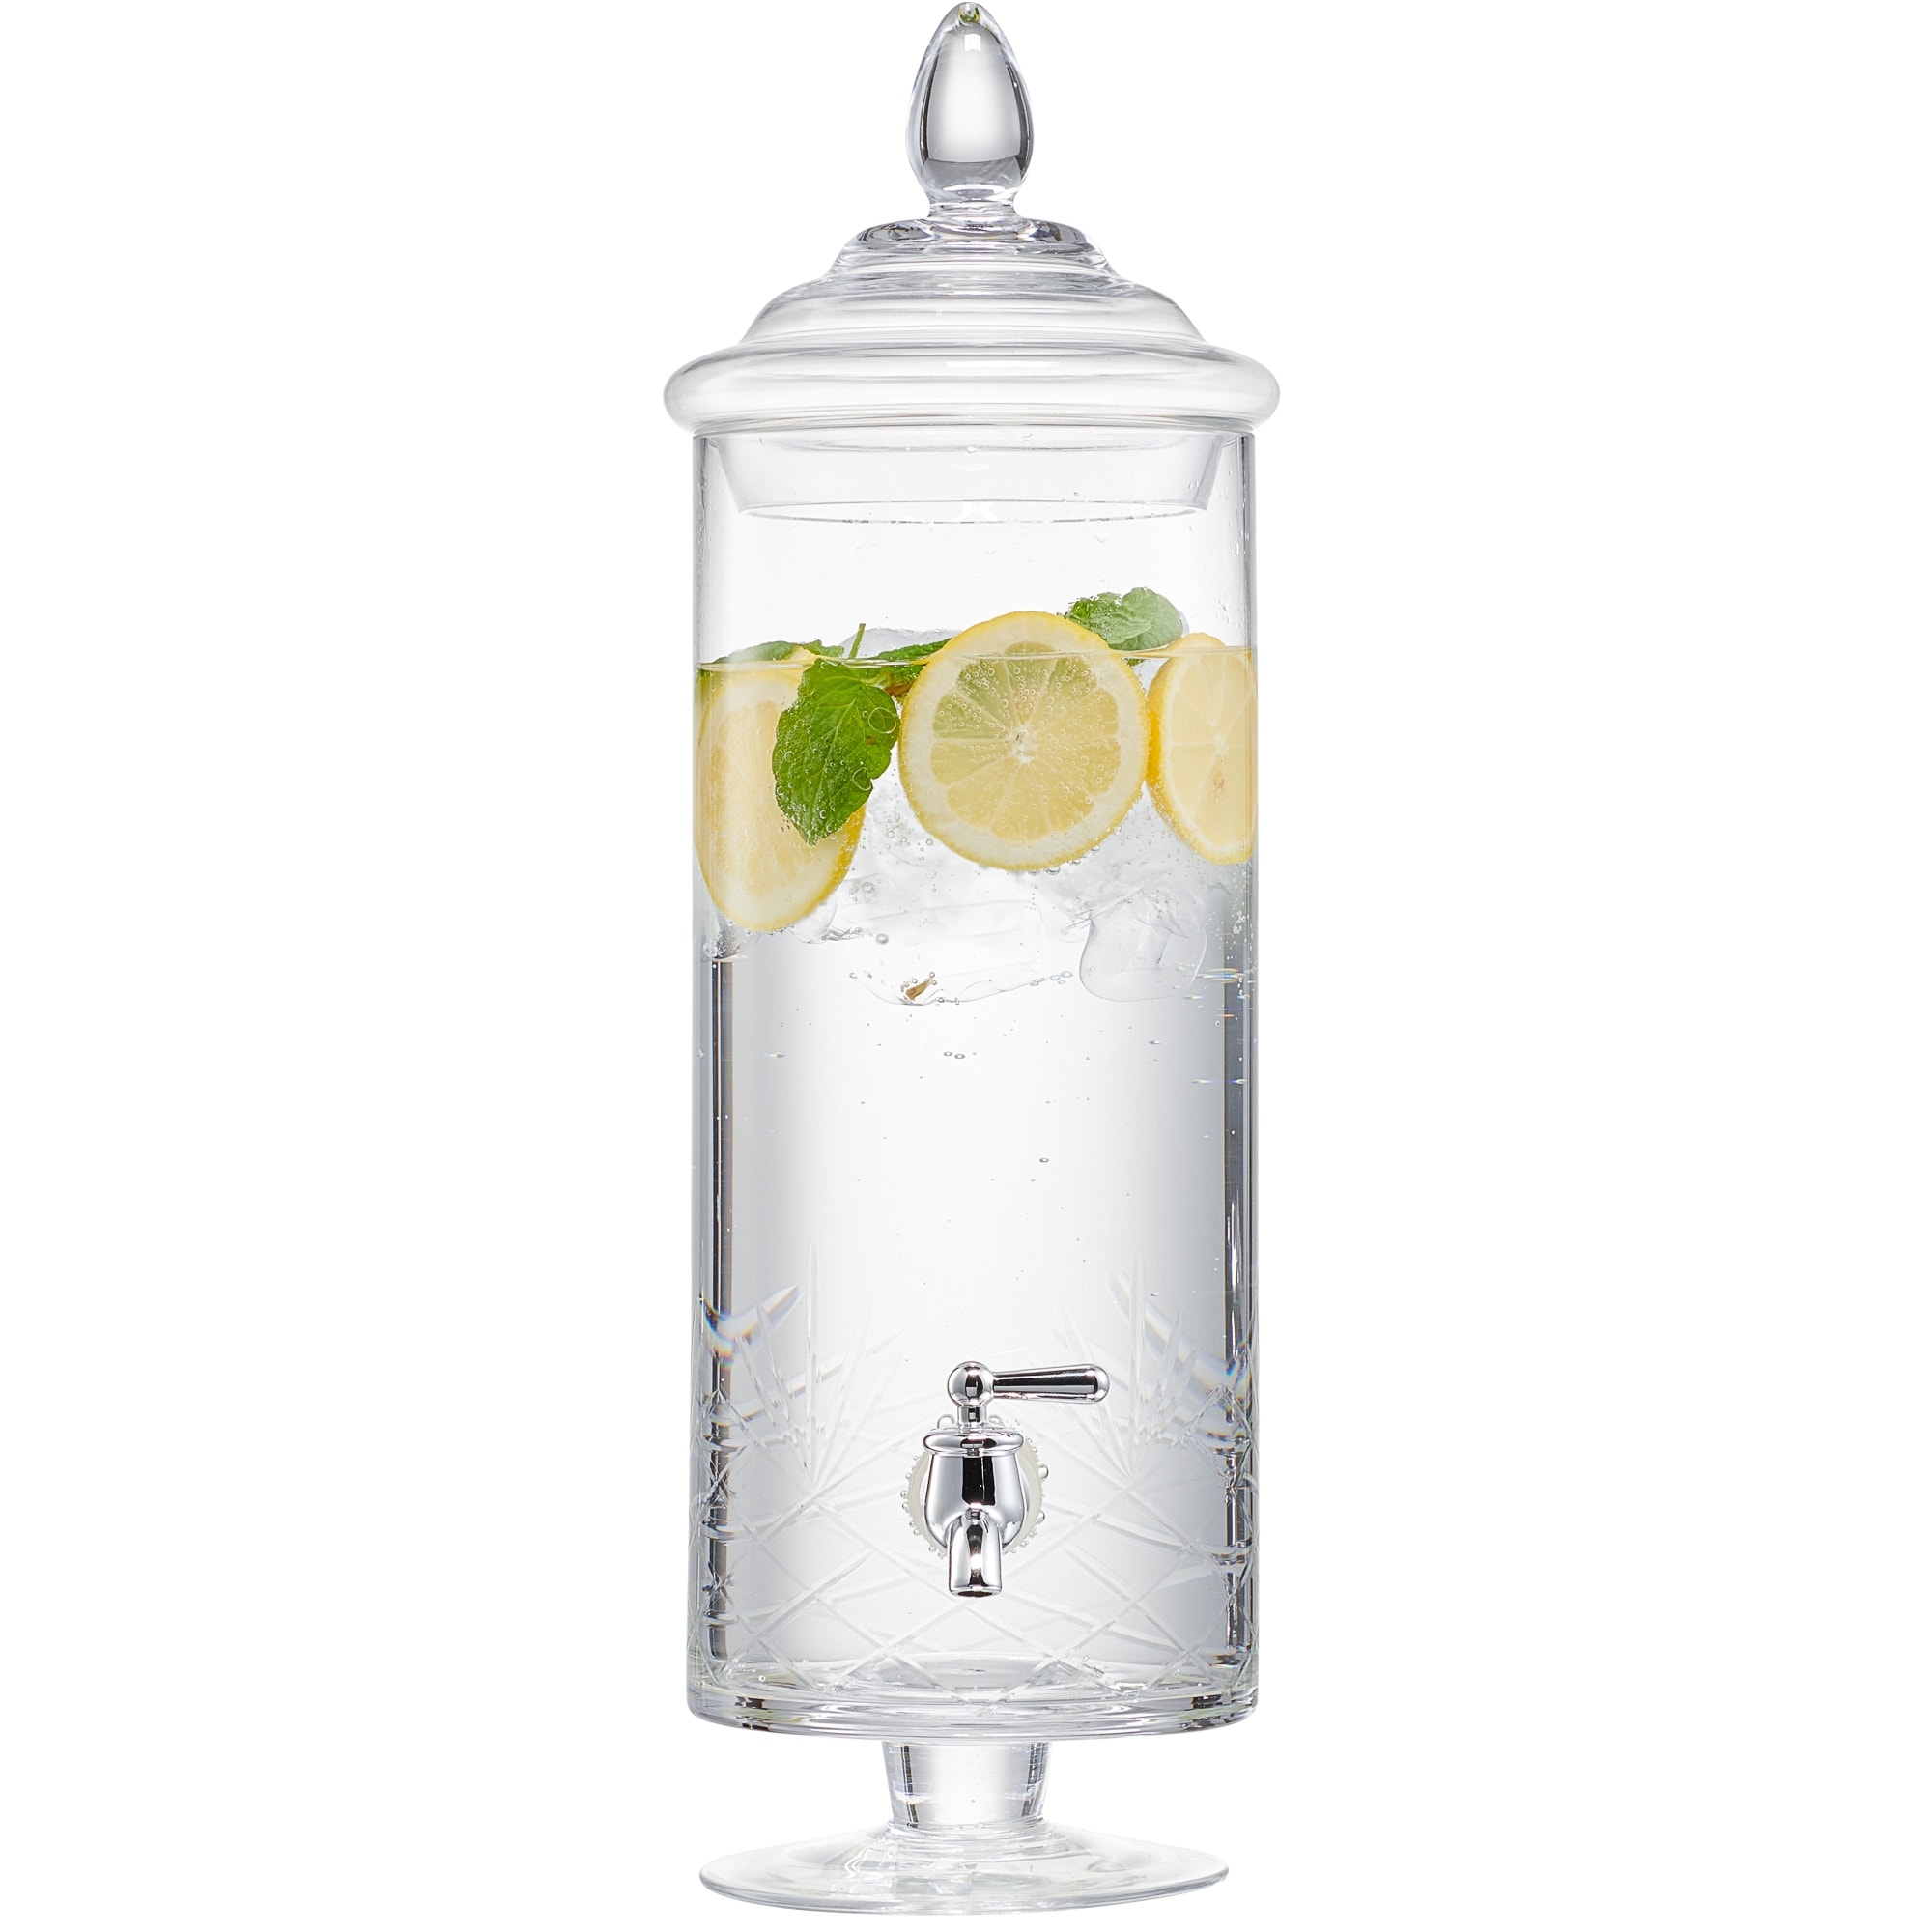 https://ak1.ostkcdn.com/images/products/is/images/direct/7a288626fb89abc00b2ee78680bba77e6cfba61f/Provence-Beverage-Dispenser.jpg